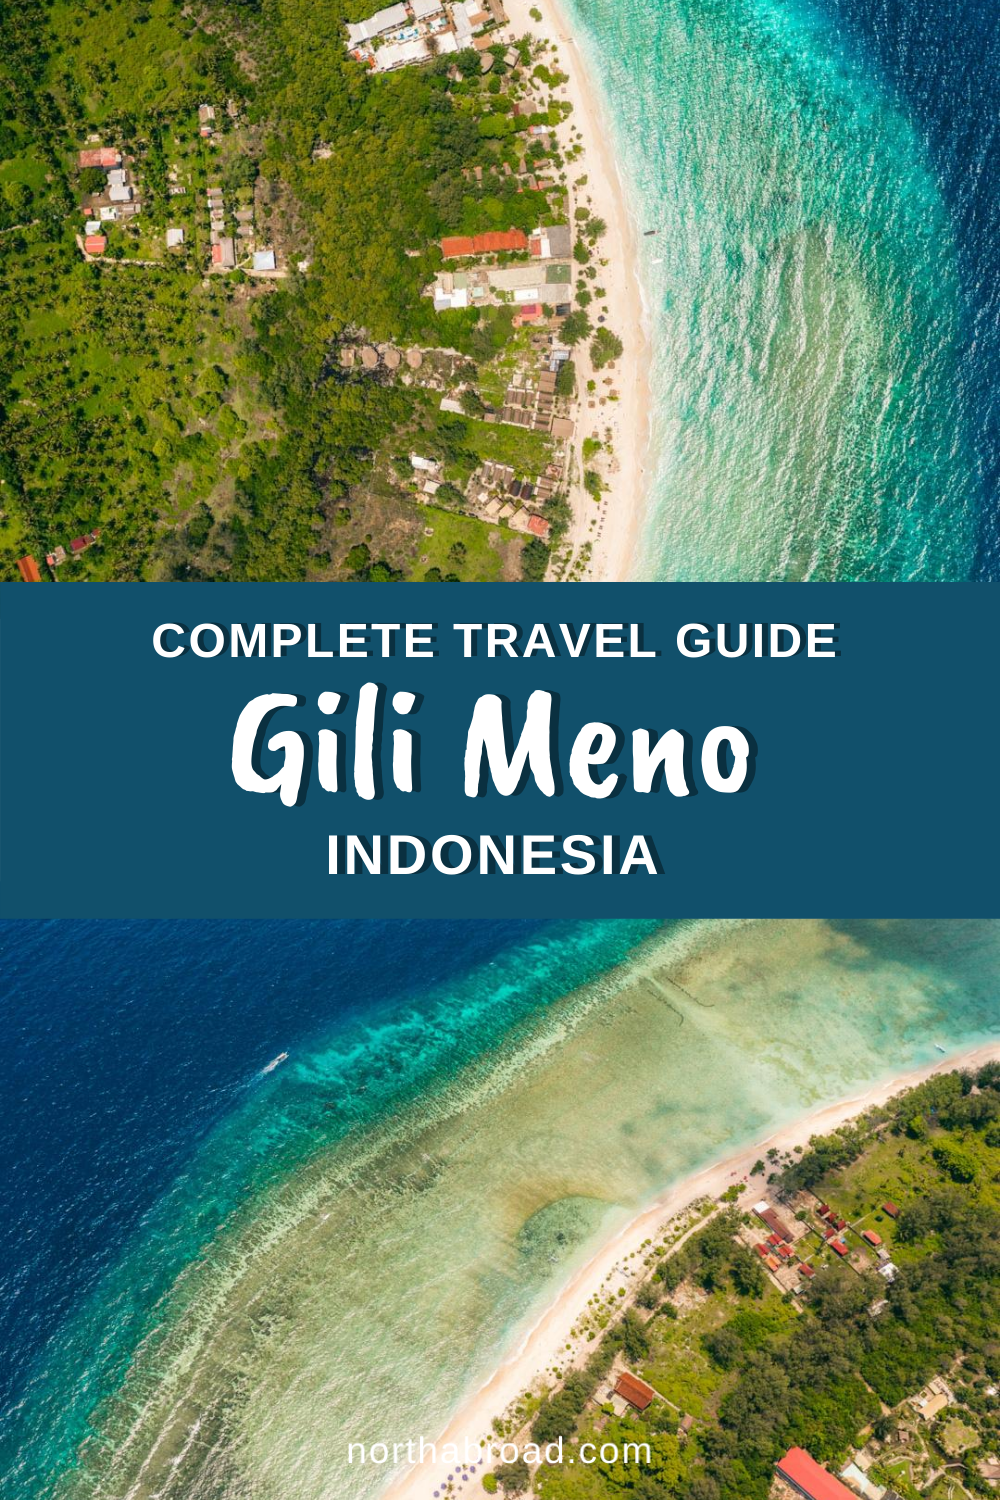 A Complete Travel Guide to Gili Meno in Indonesia: A Peaceful Island Close to Bali